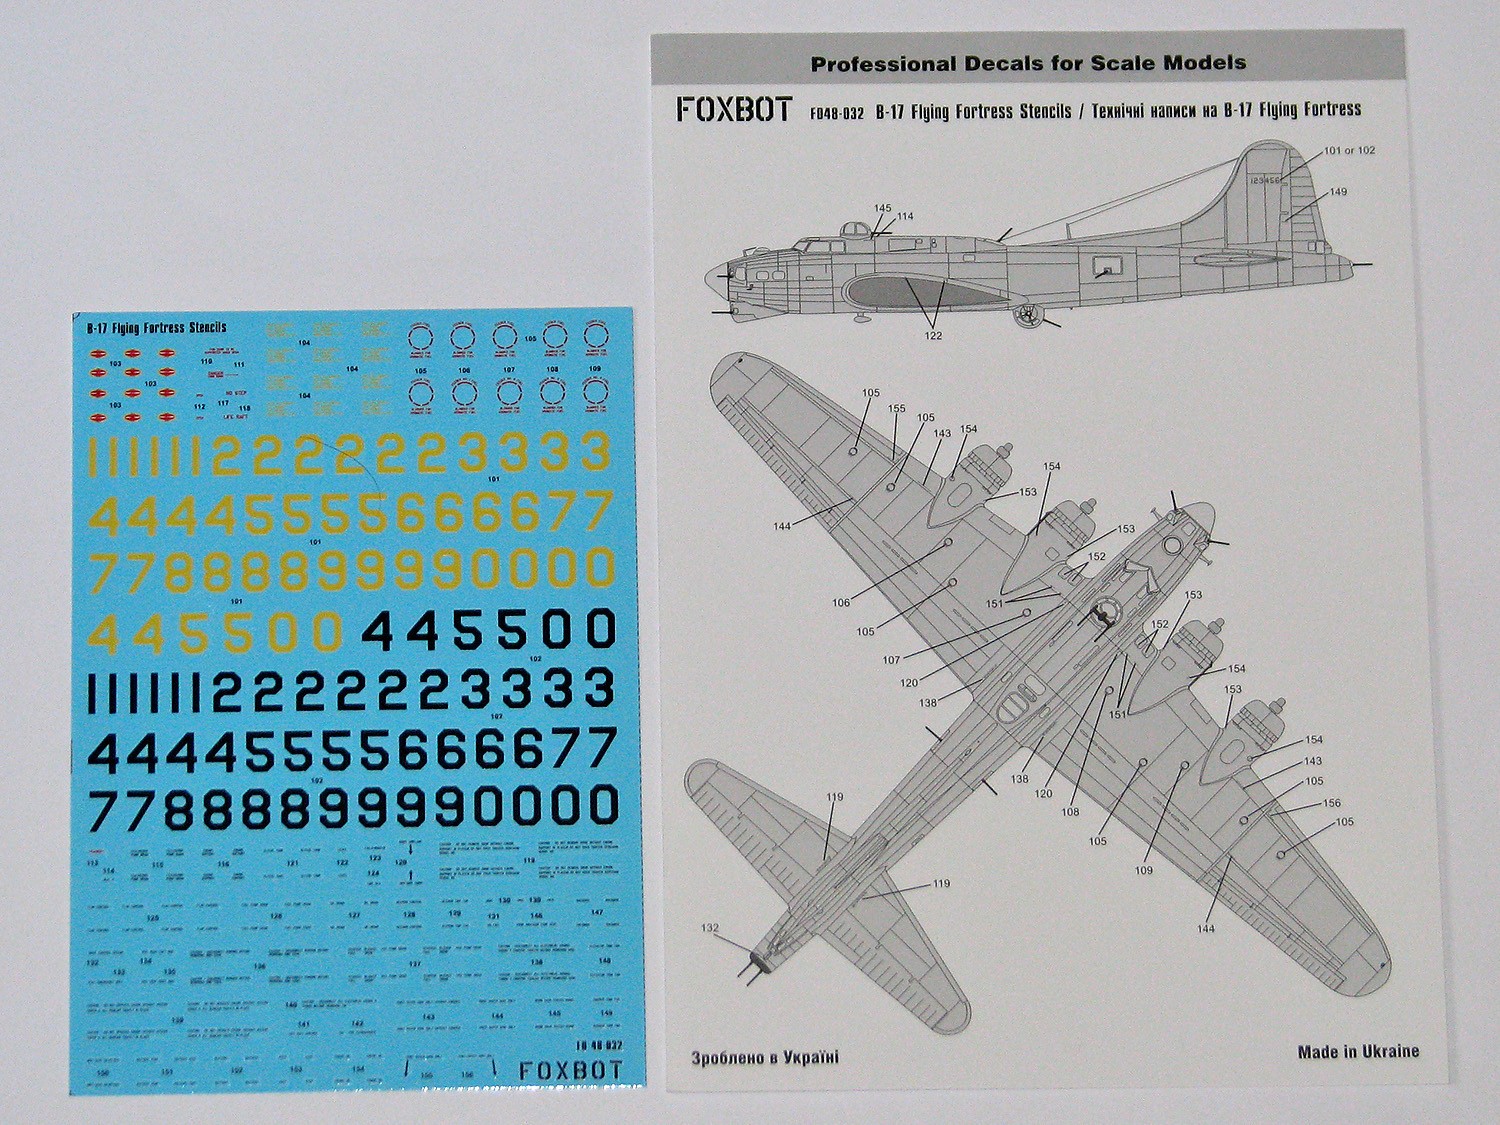  Foxbot Decals Décal Pochoirs pour Boeing B-17 Flying Fortress (conçu 